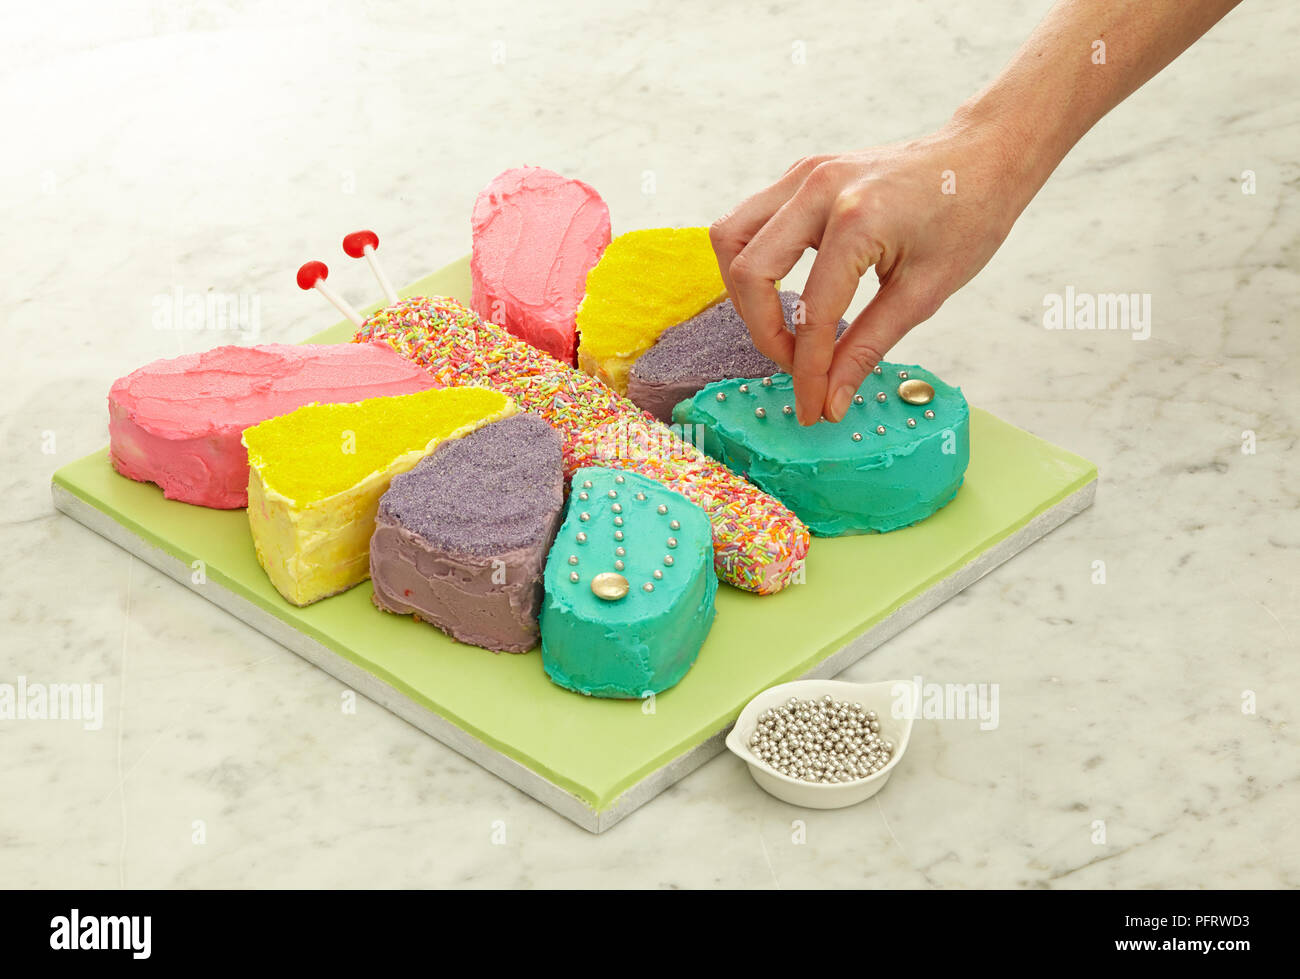 Decorating butterfly cake with edible beads Stock Photo